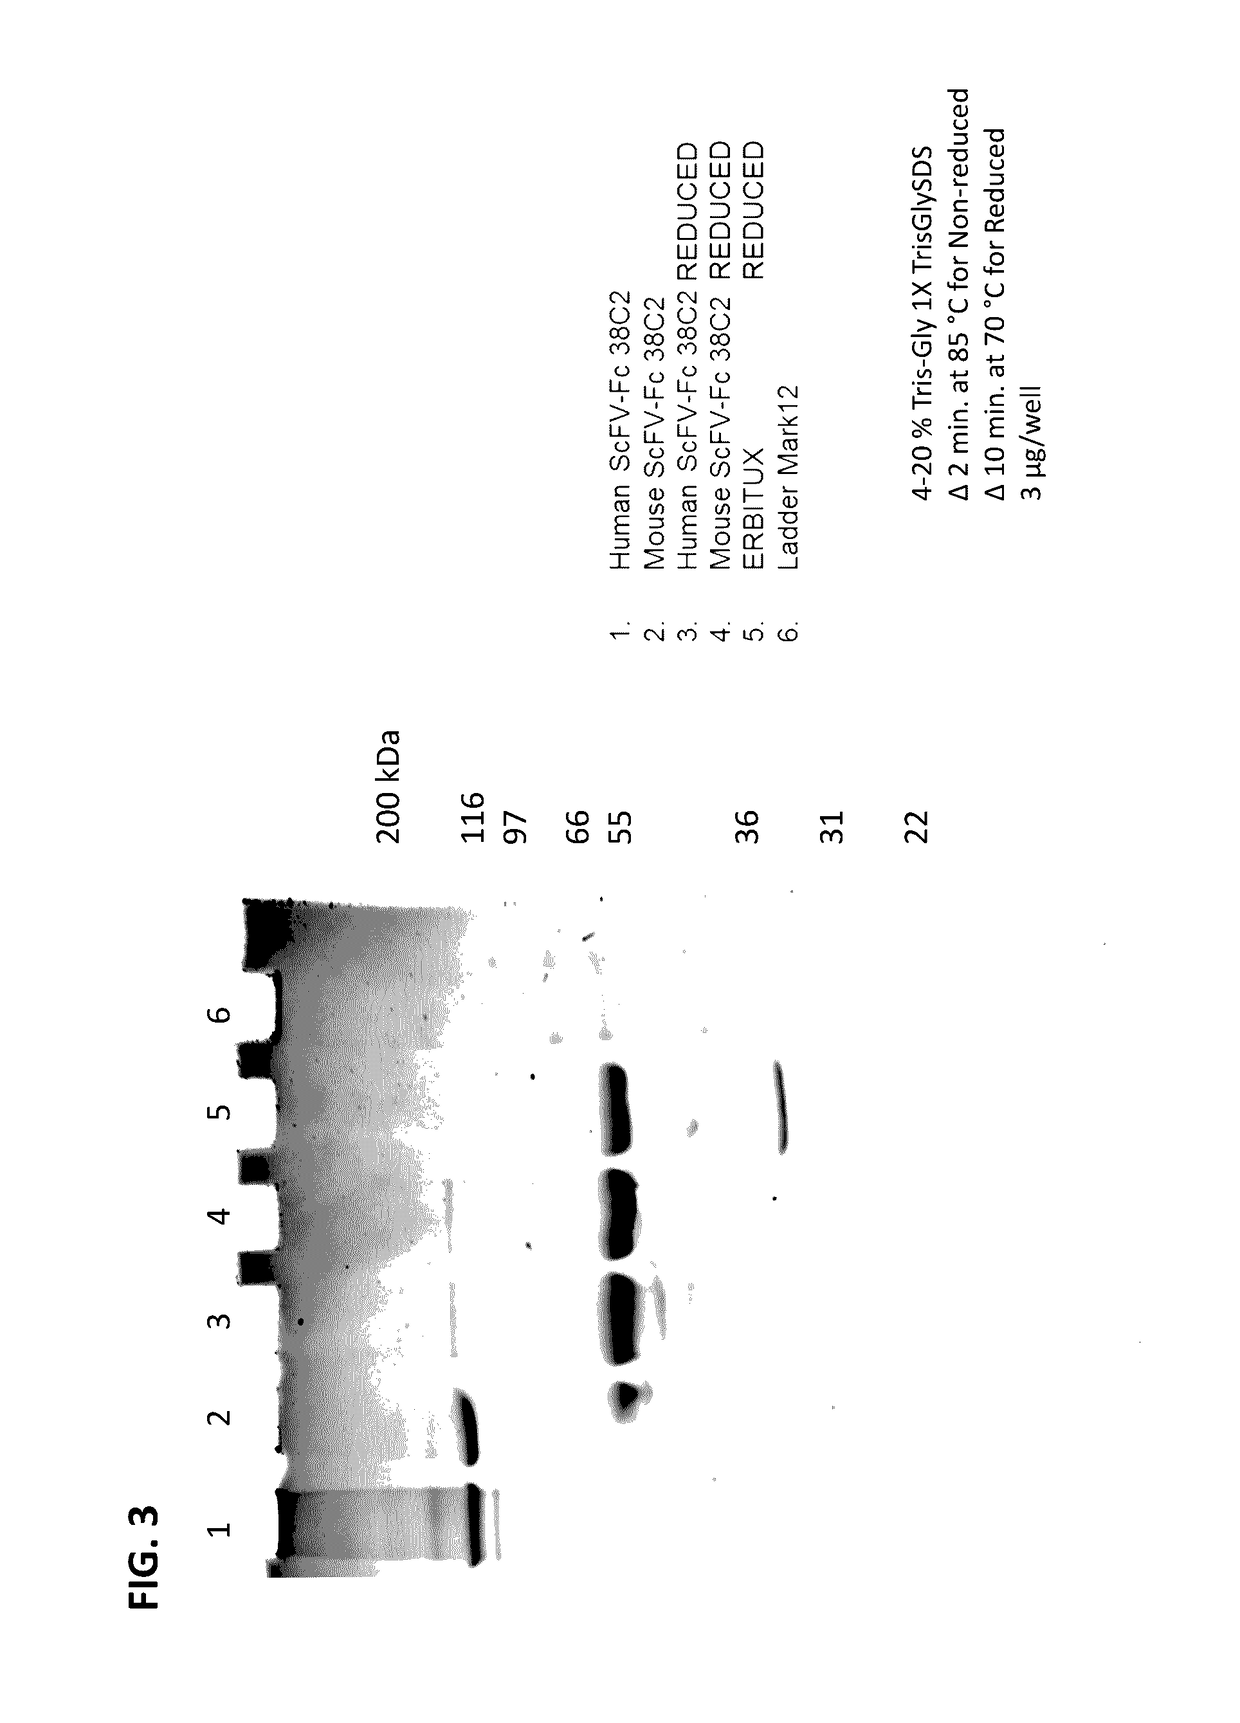 Programmable universal cell receptors and method of using the same